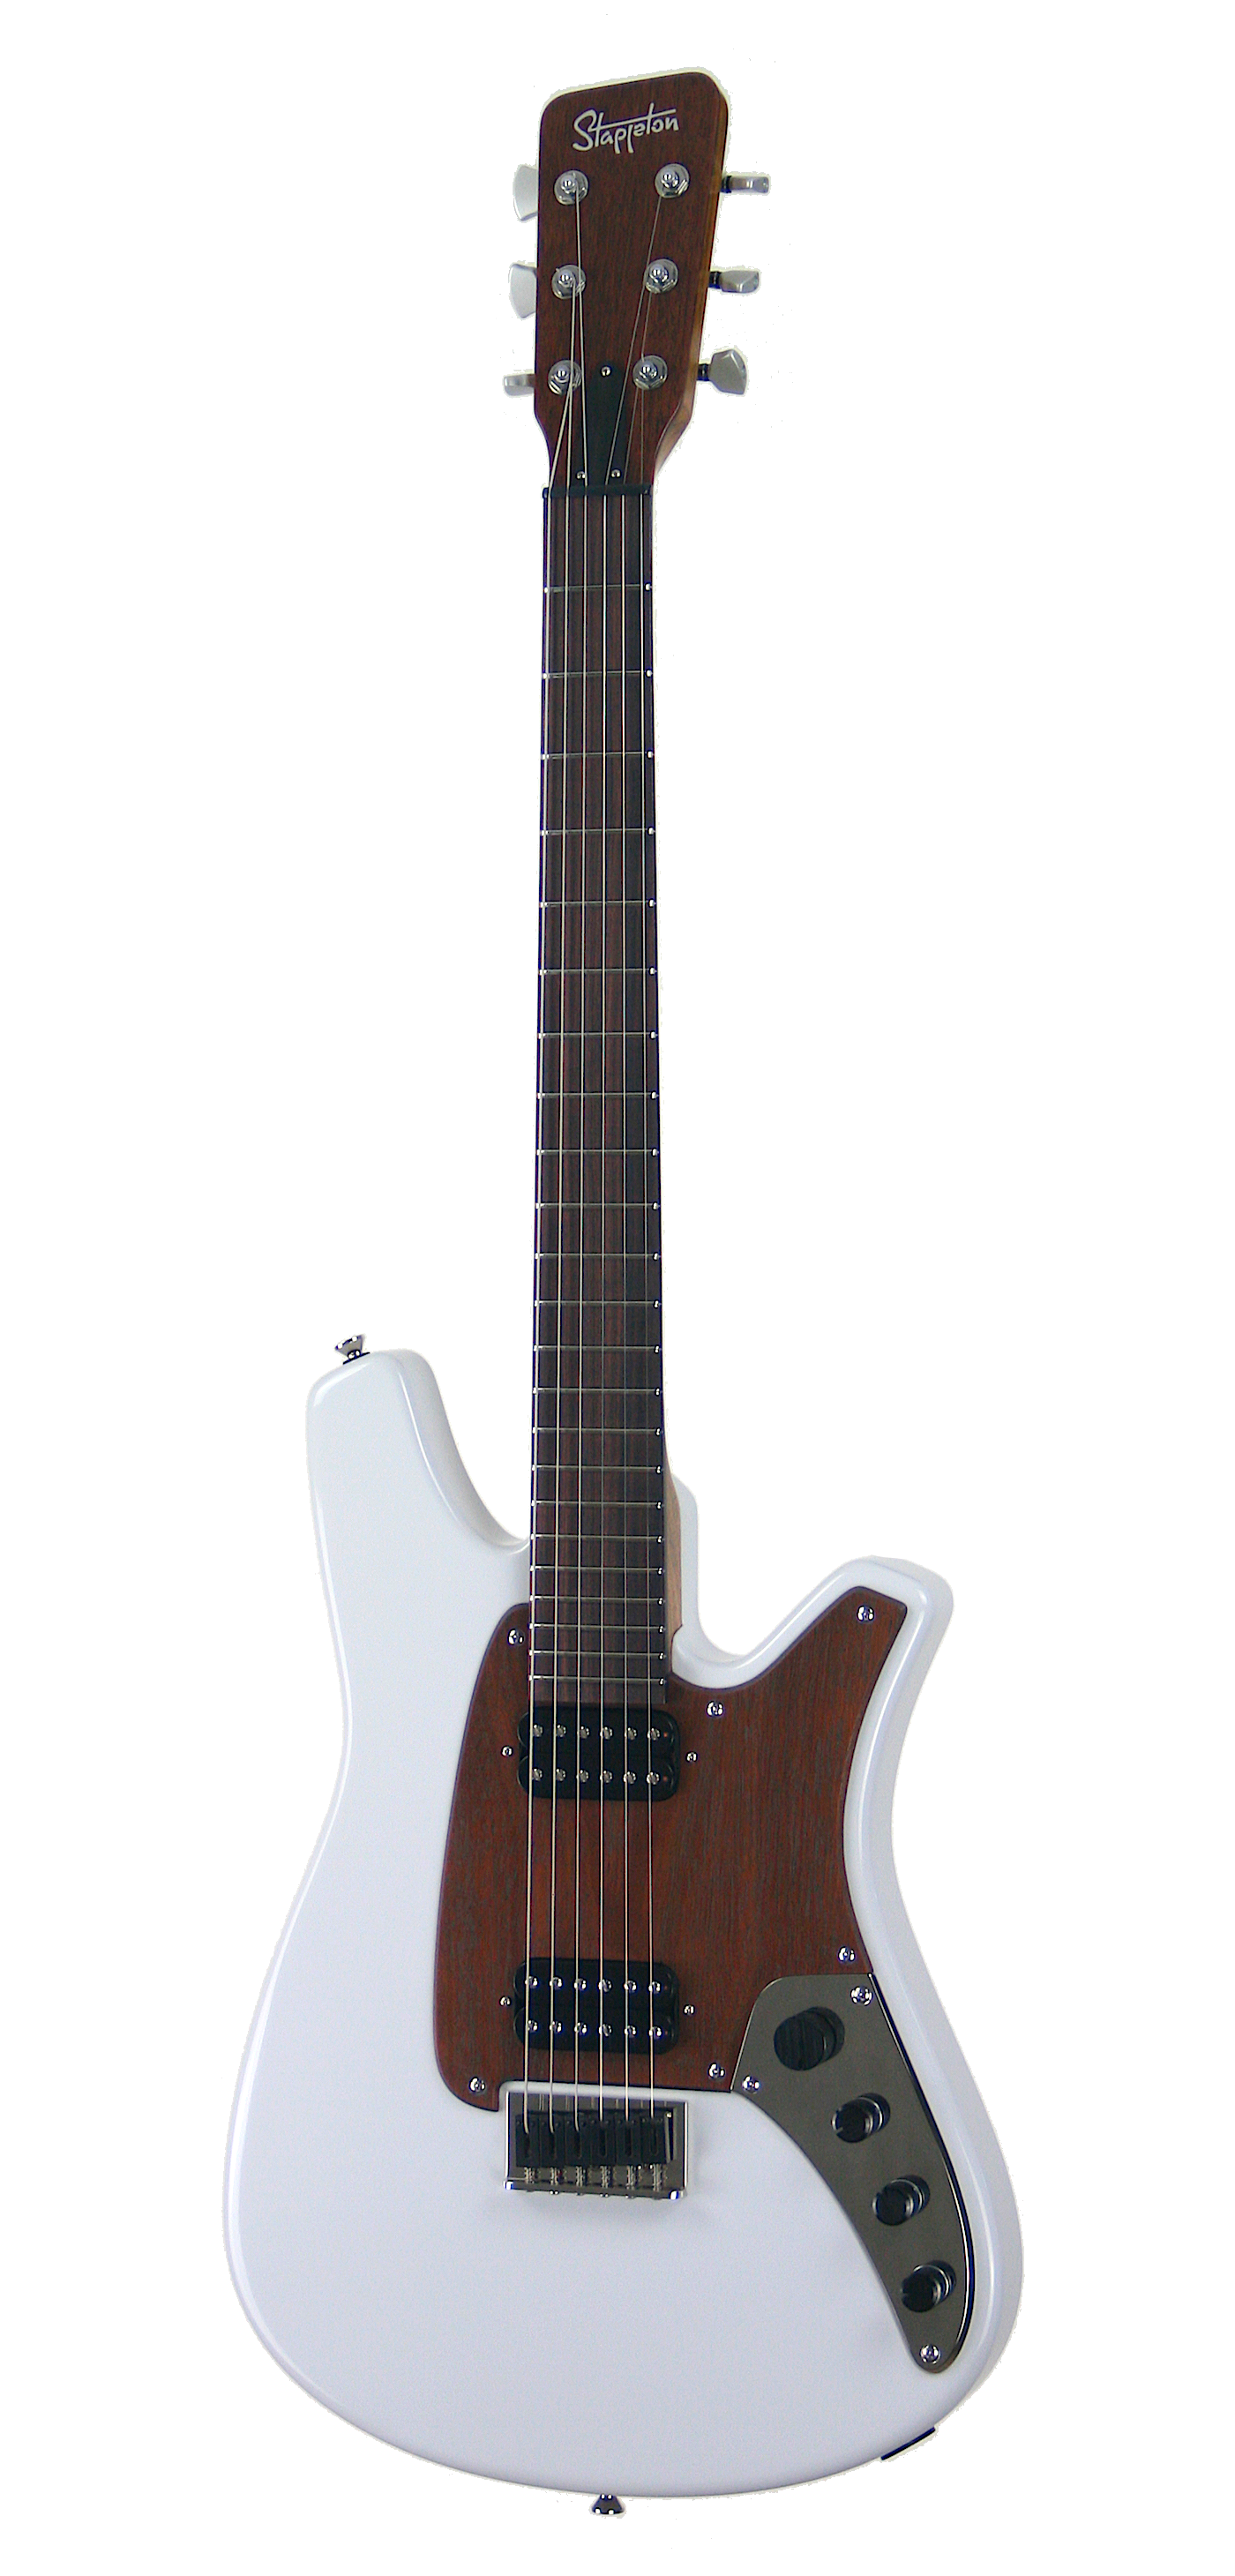 SKYE™ Light blue-grey. White Ash body, rosewood neck and fingerboard.